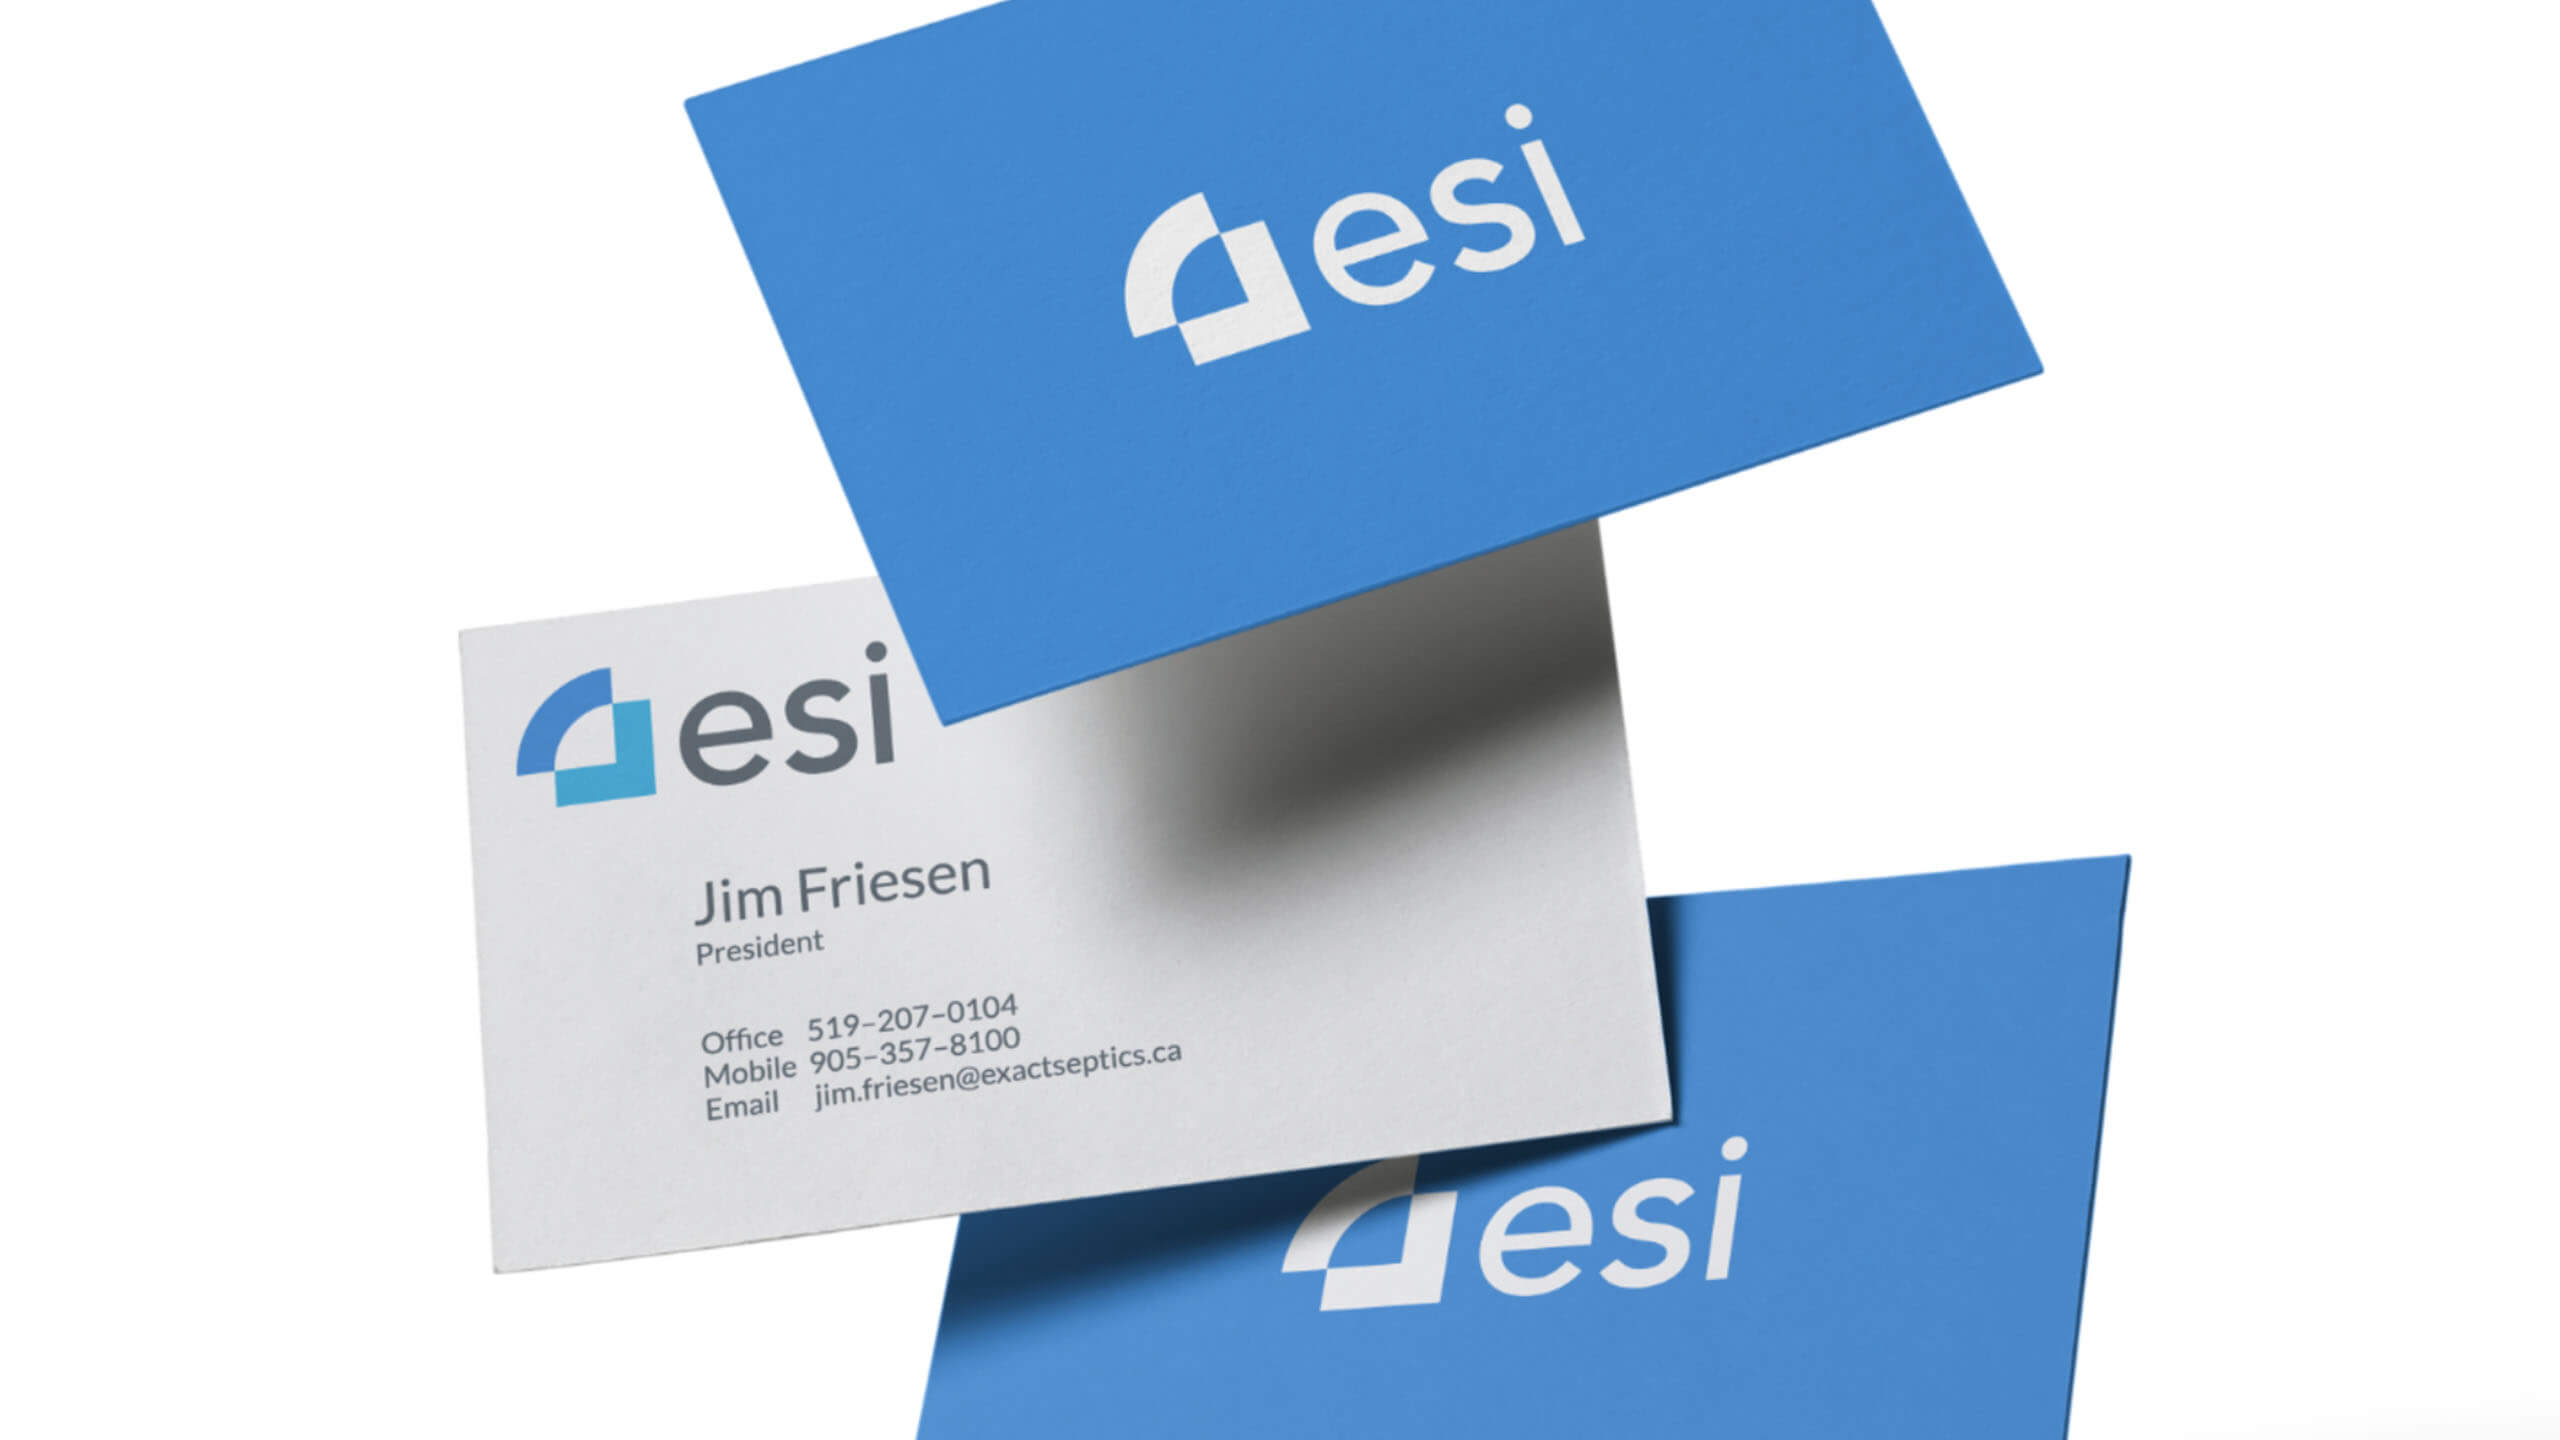 ESI Group business card design by The Coopers